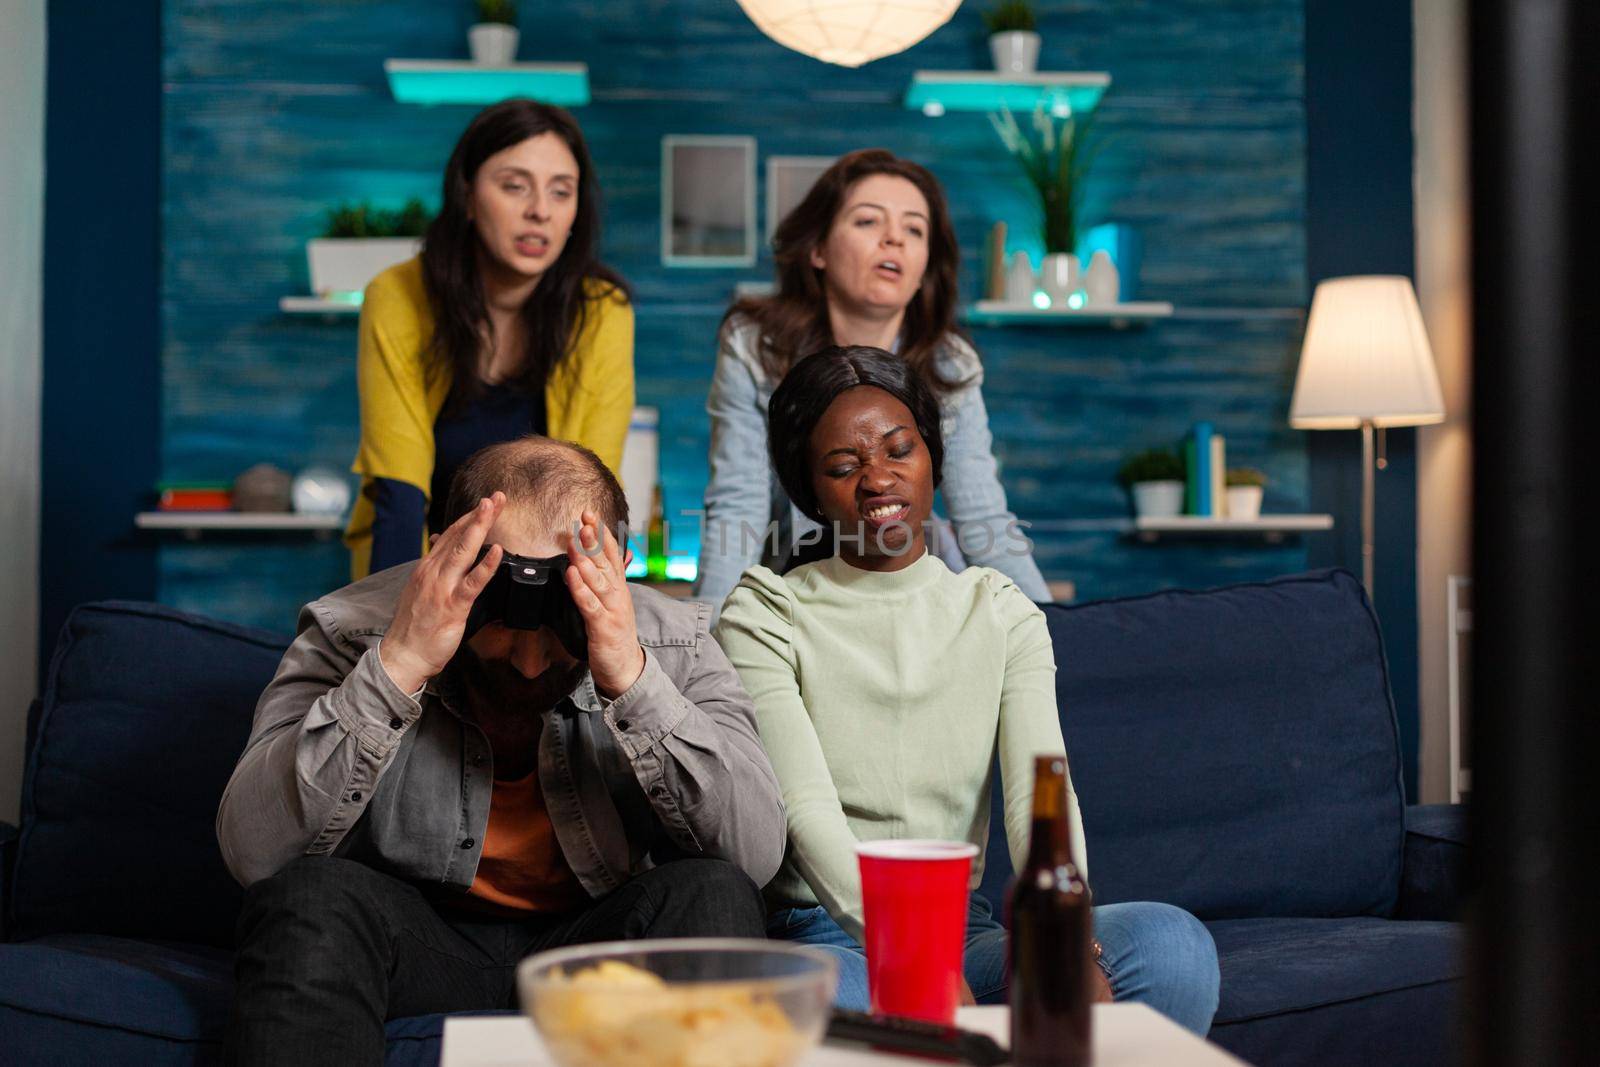 Angry man and multi ethnic friends upset after losing game competition, bonding and sitting on couch after drinking beer. Mixed race group of people hanging out together having fun late at night in living room